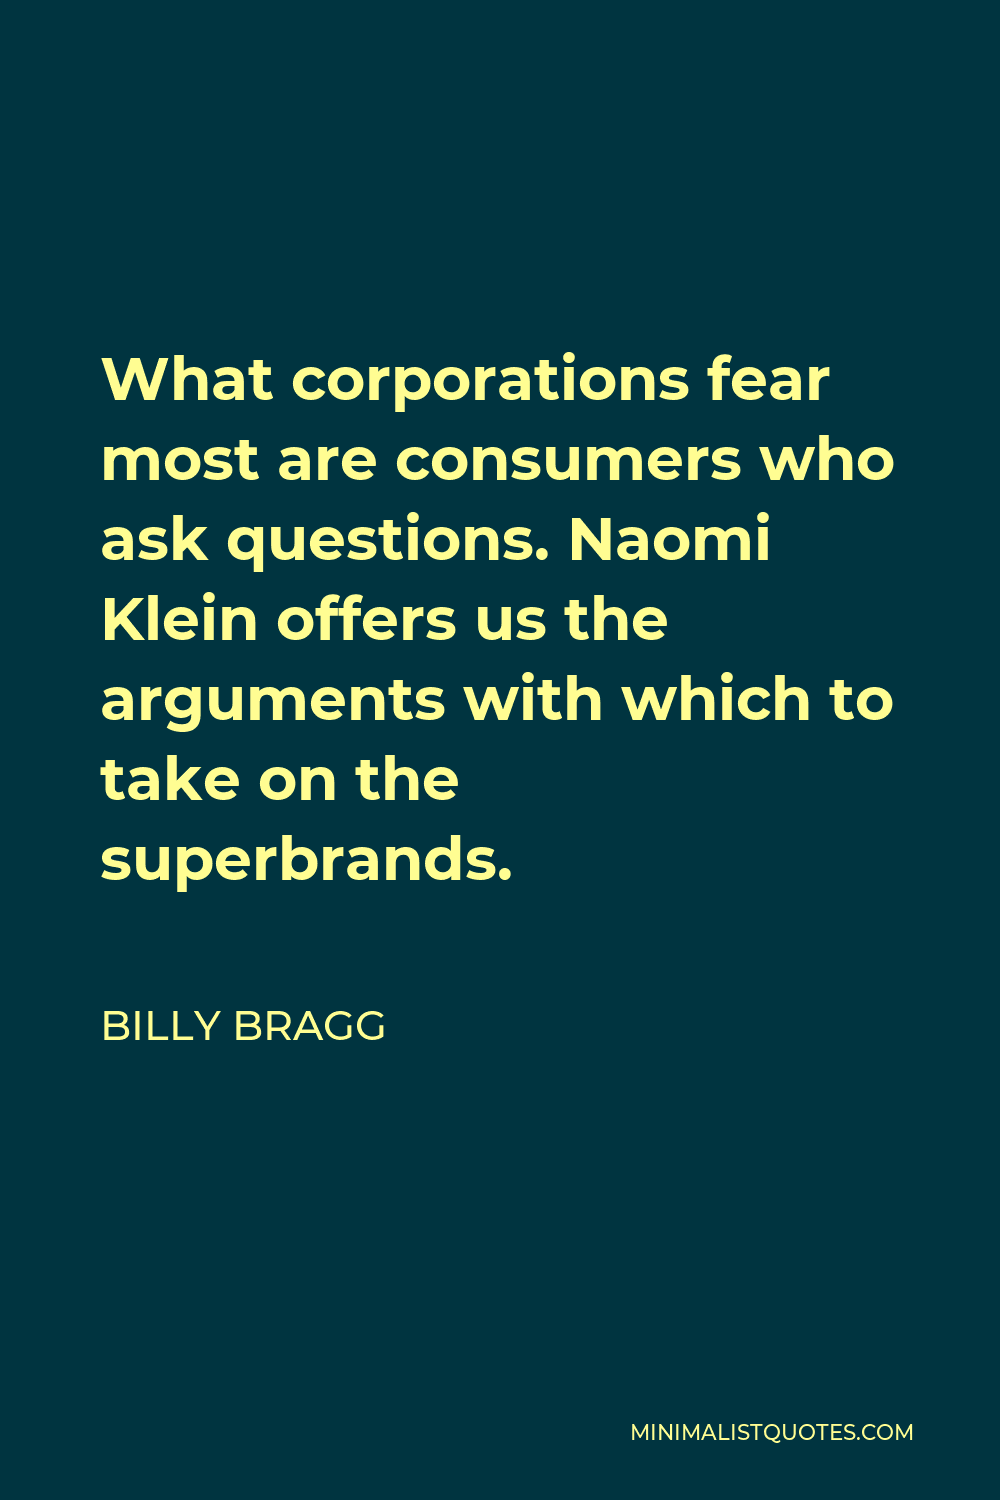 Billy Bragg Quote - What corporations fear most are consumers who ask questions. Naomi Klein offers us the arguments with which to take on the superbrands.